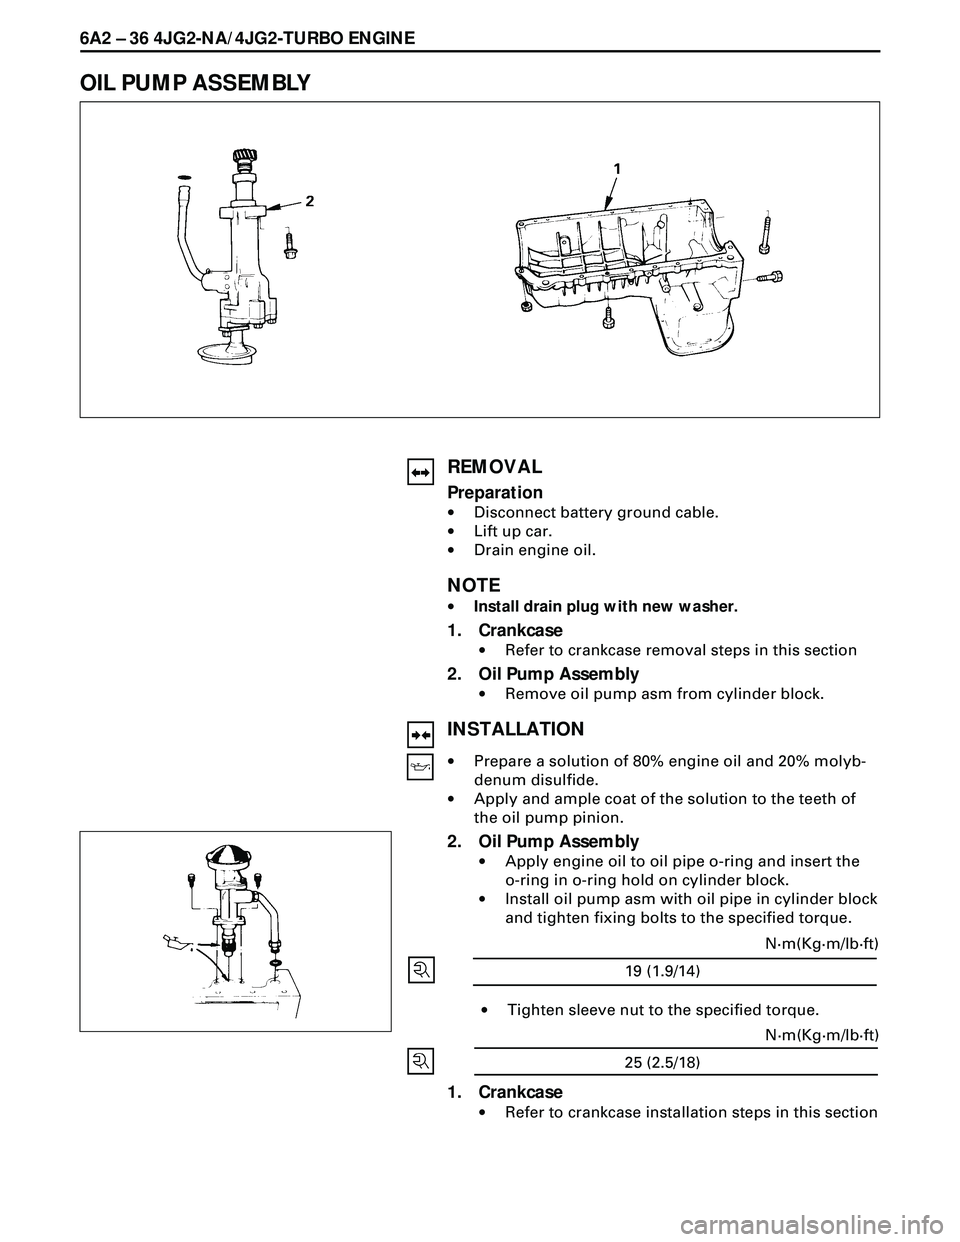 ISUZU TROOPER 1998  Service Owners Guide 6A2 Ð 36 4JG2-NA/4JG2-TURBO ENGINE
OIL PUMP ASSEMBLY
REMOVAL
Preparation
·Disconnect battery ground cable.
·Lift up car.
·Drain engine oil.
NOTE
·Install drain plug with new washer.
1. Crankcase
